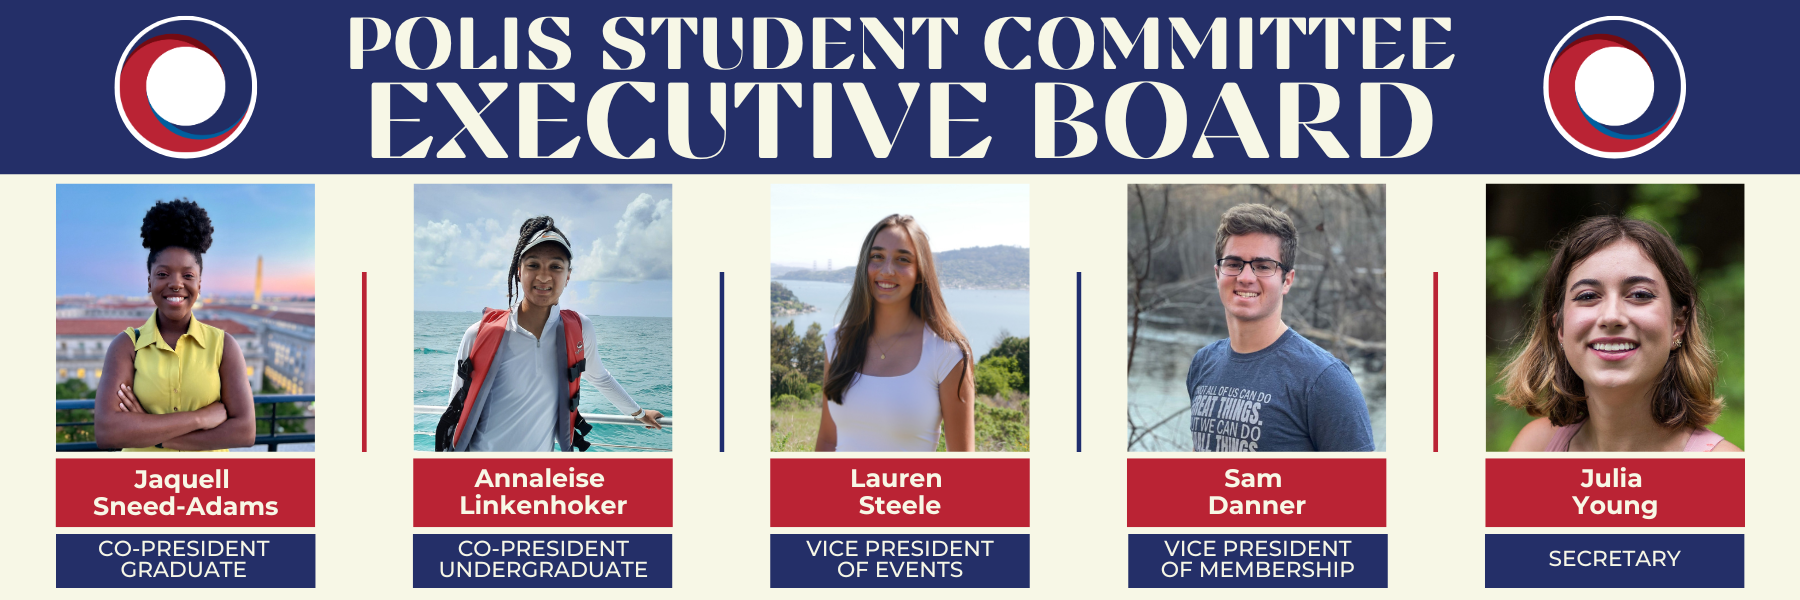 POLIS Student Committee Executive Board